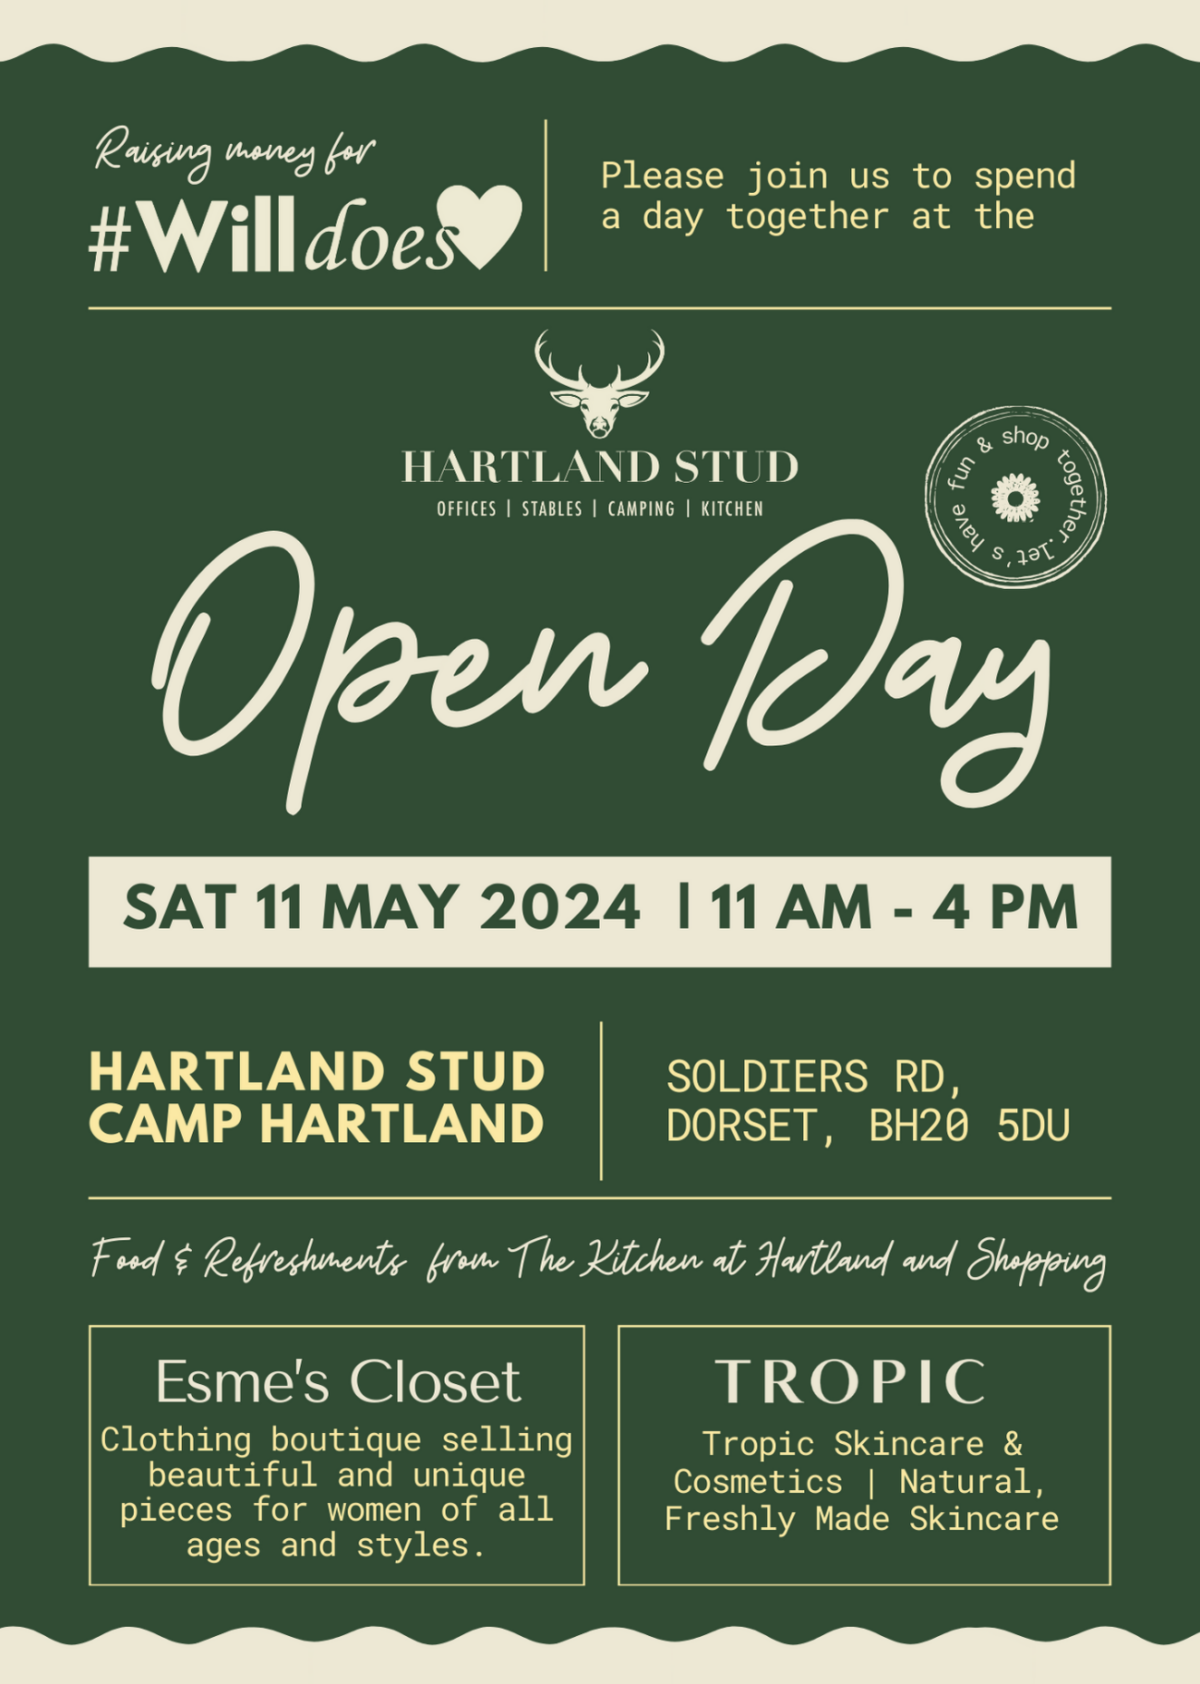 WillDoes Hartland Stud open day poster